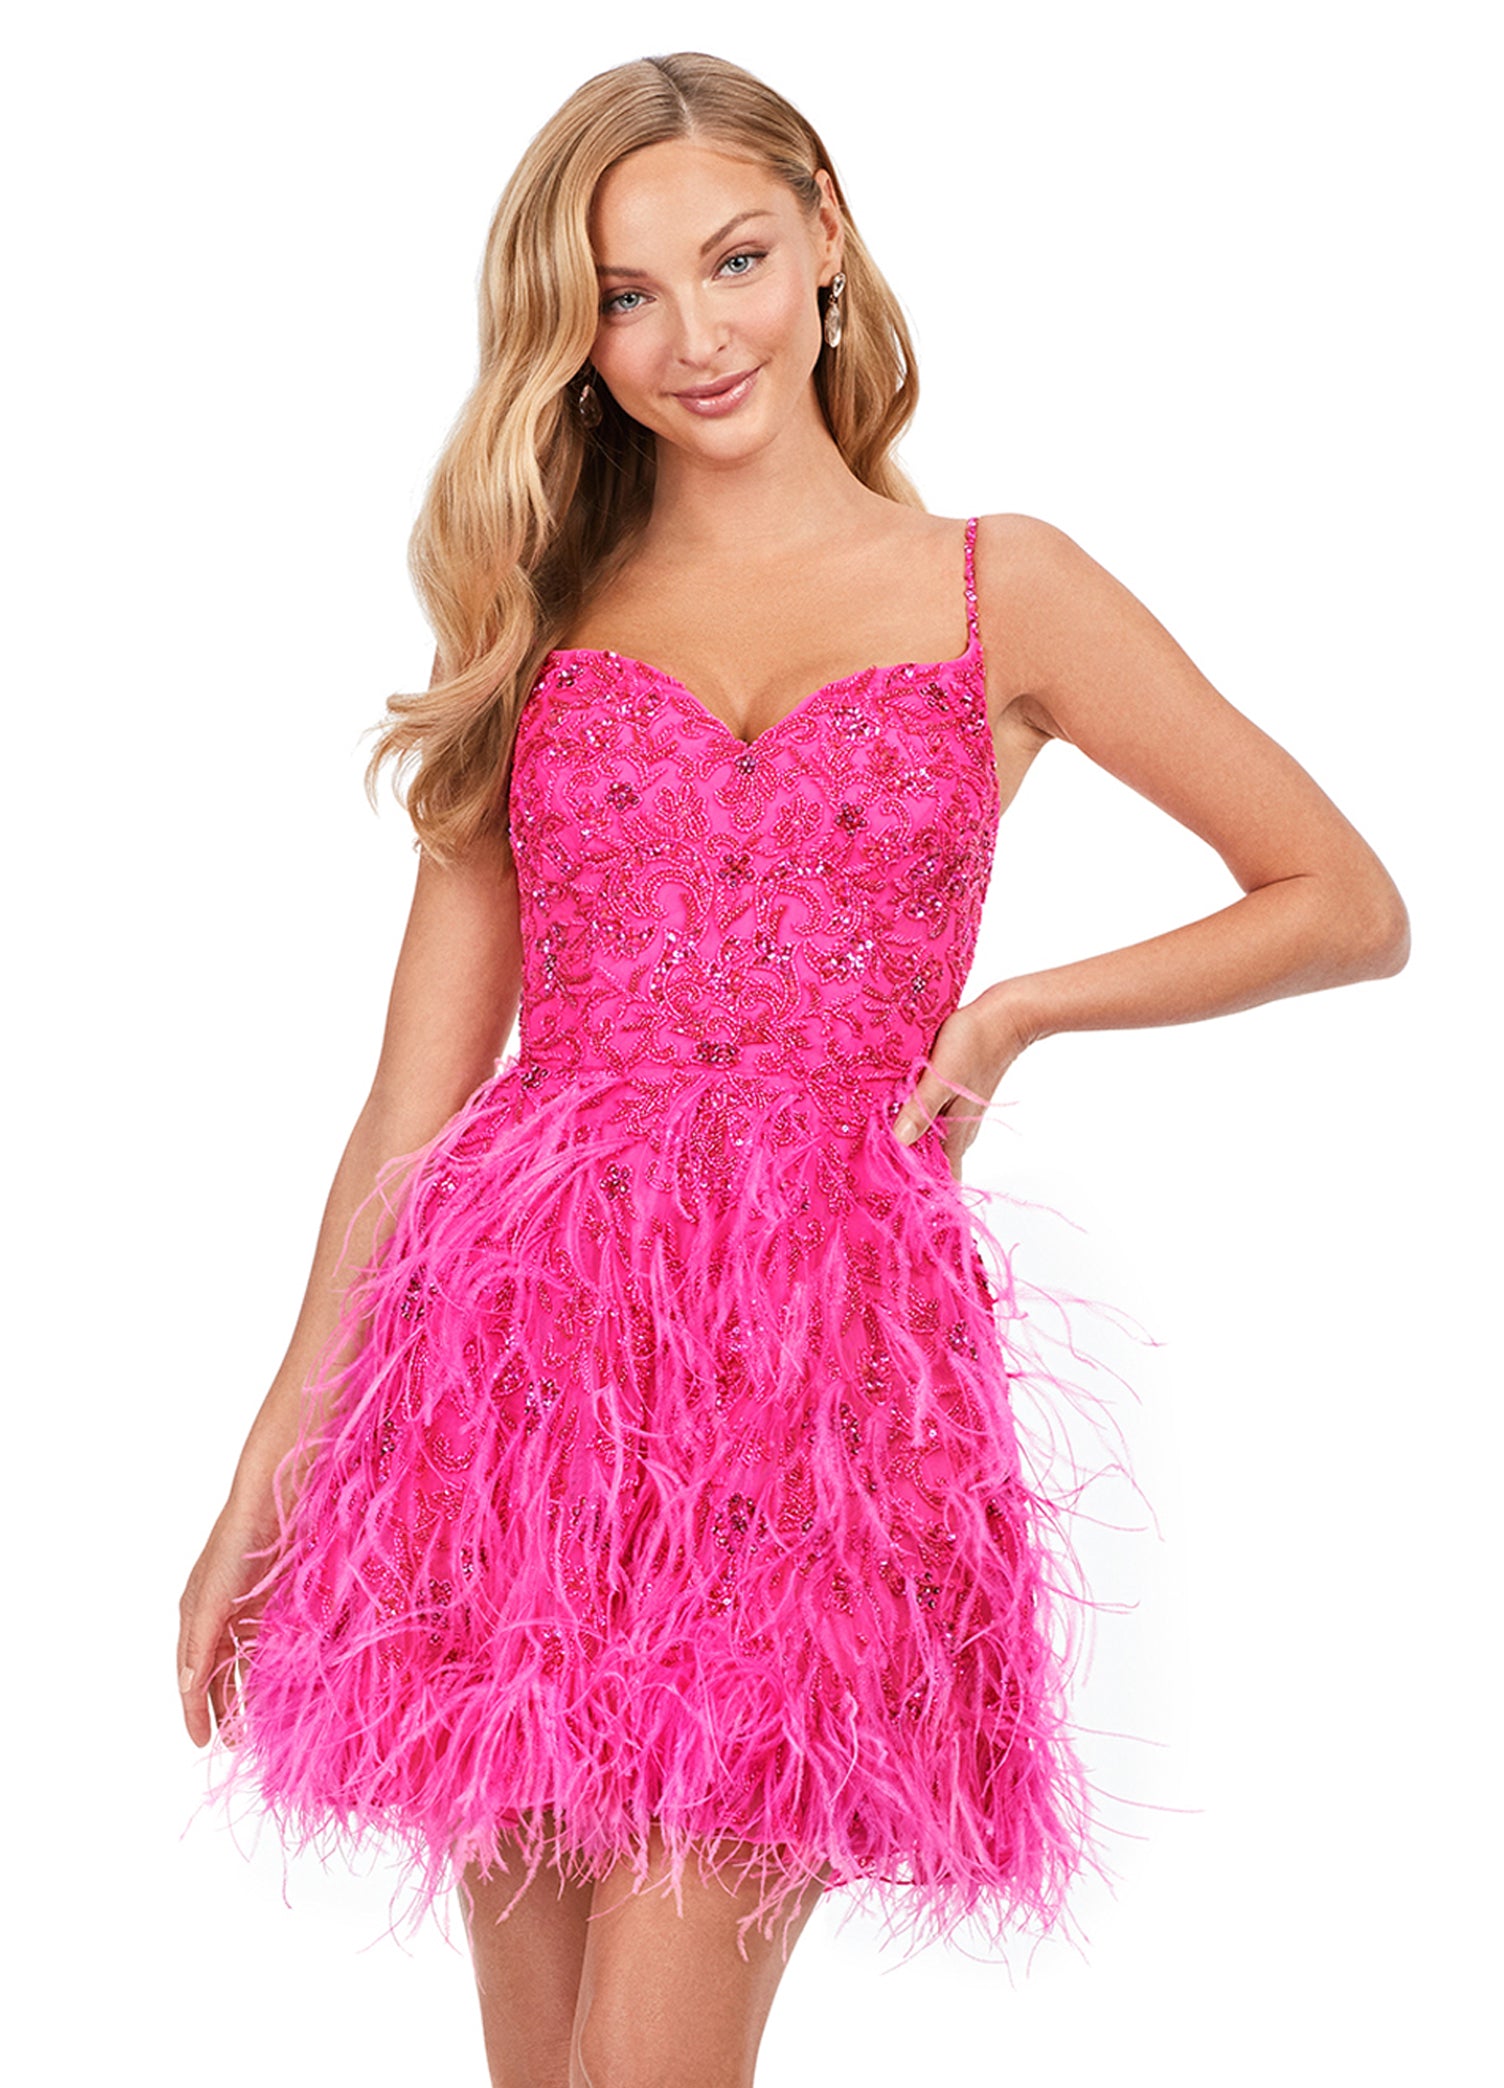 Ashley Lauren 4604 Short A Line Beaded Feather Formal Cocktail Dress Sequin Pageant Wear Turn heads in this fabulous cocktail dress which features beading throughout and pops of feathers on the skirt. The perfect gown for some fun on the dance floor or stage! Sweetheart Neckline Spaghetti Straps A-Line Skirt Feather Details Sizes: 00-16 Colors: Lilac, Neon Pink, Ivory, Sky